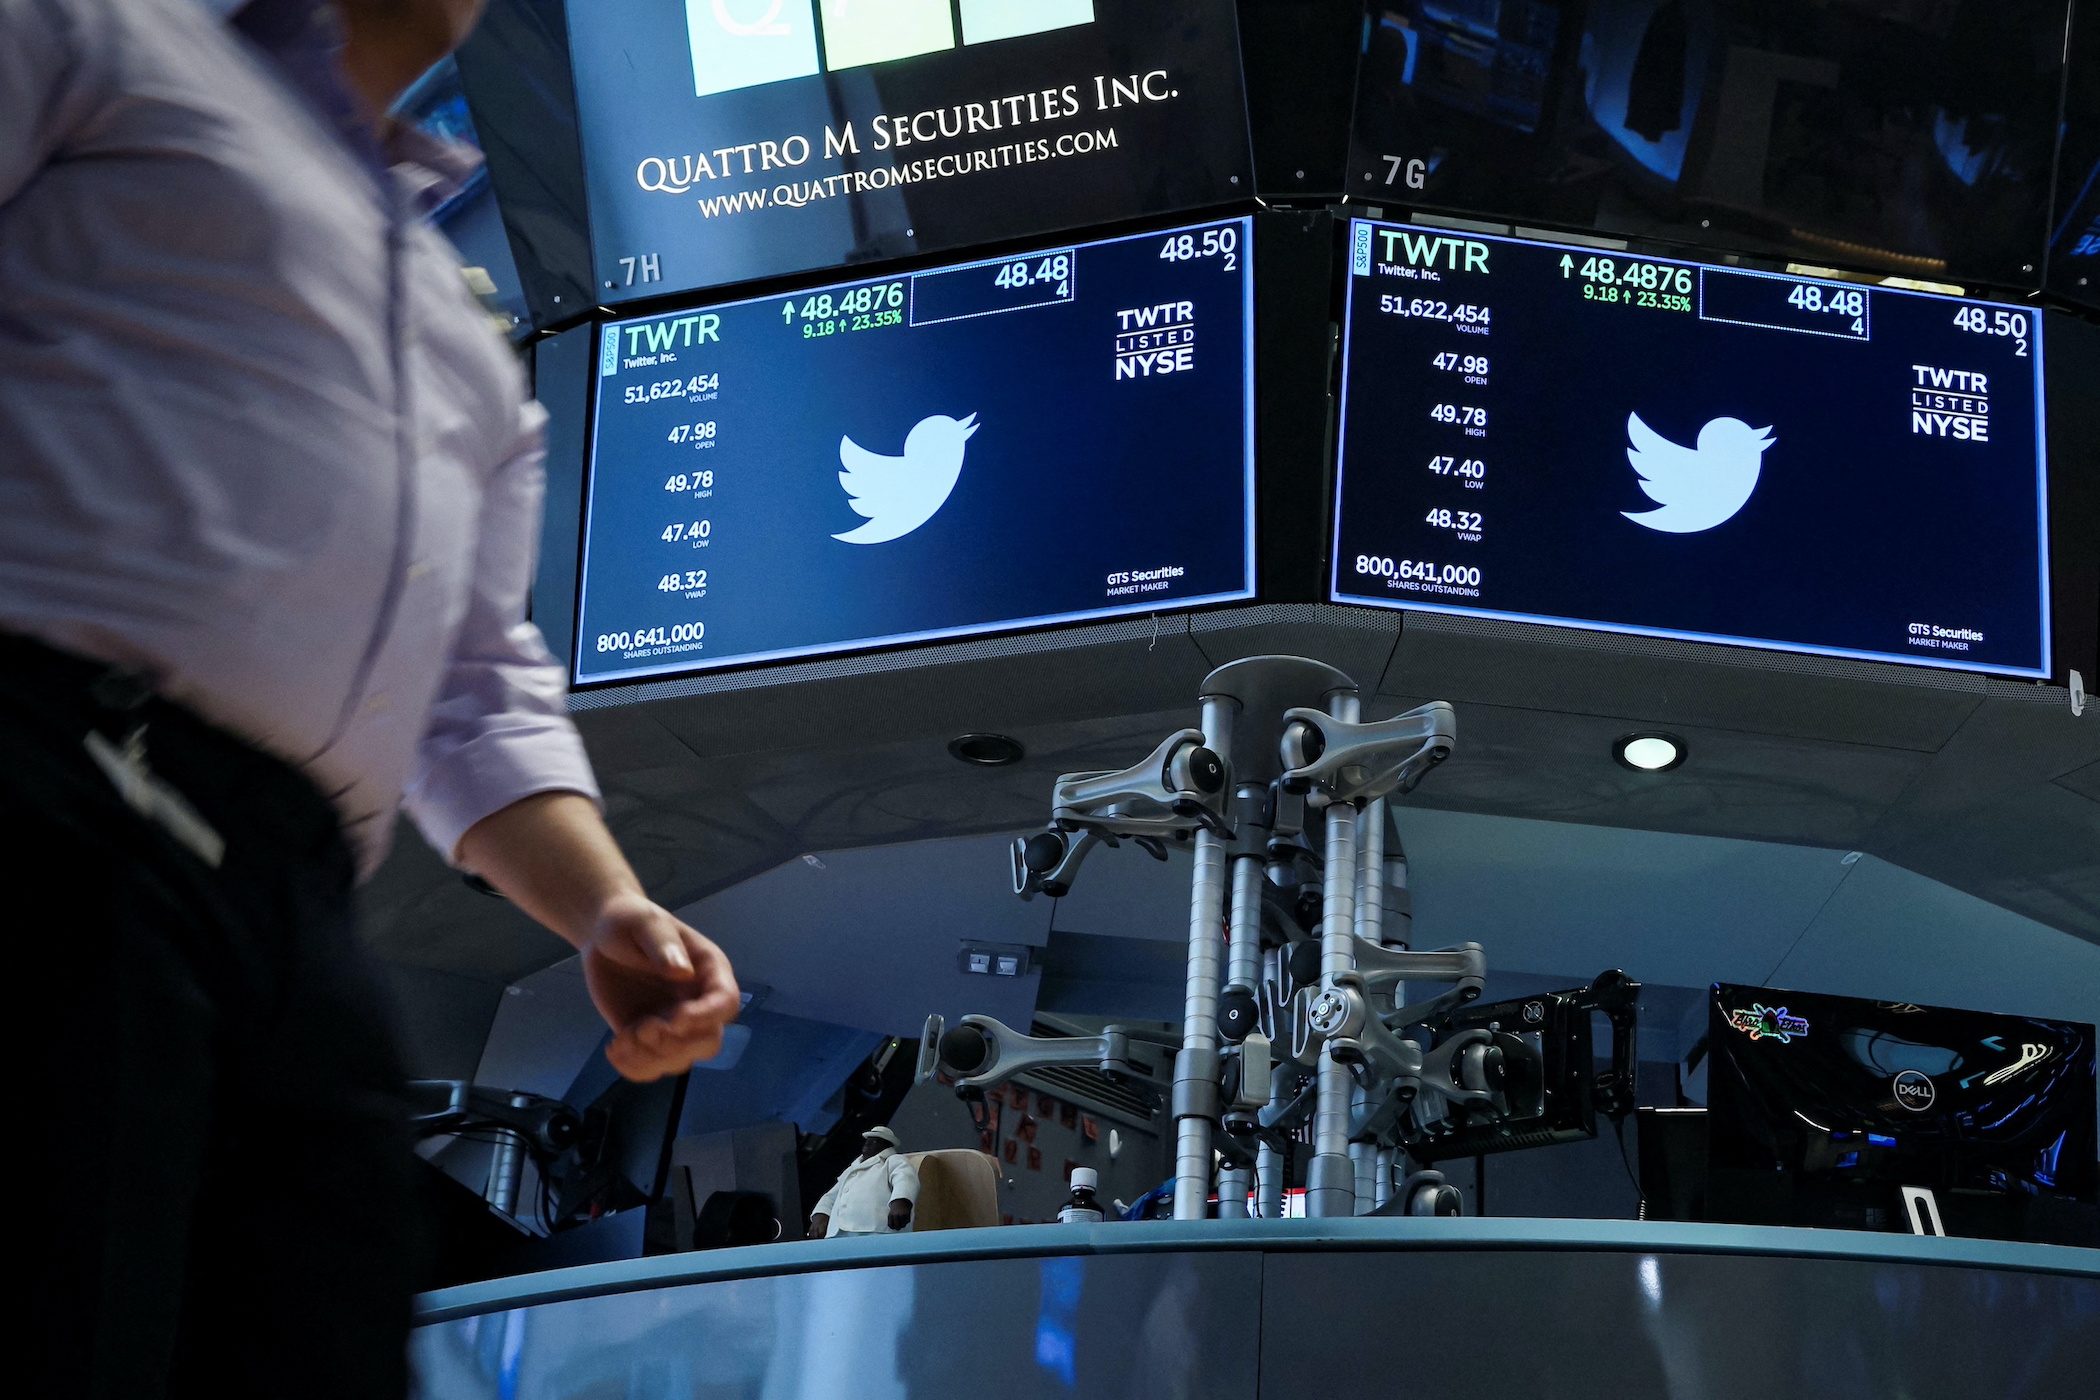 Economic fears hit global equities, commodities; Twitter lifts Wall Street